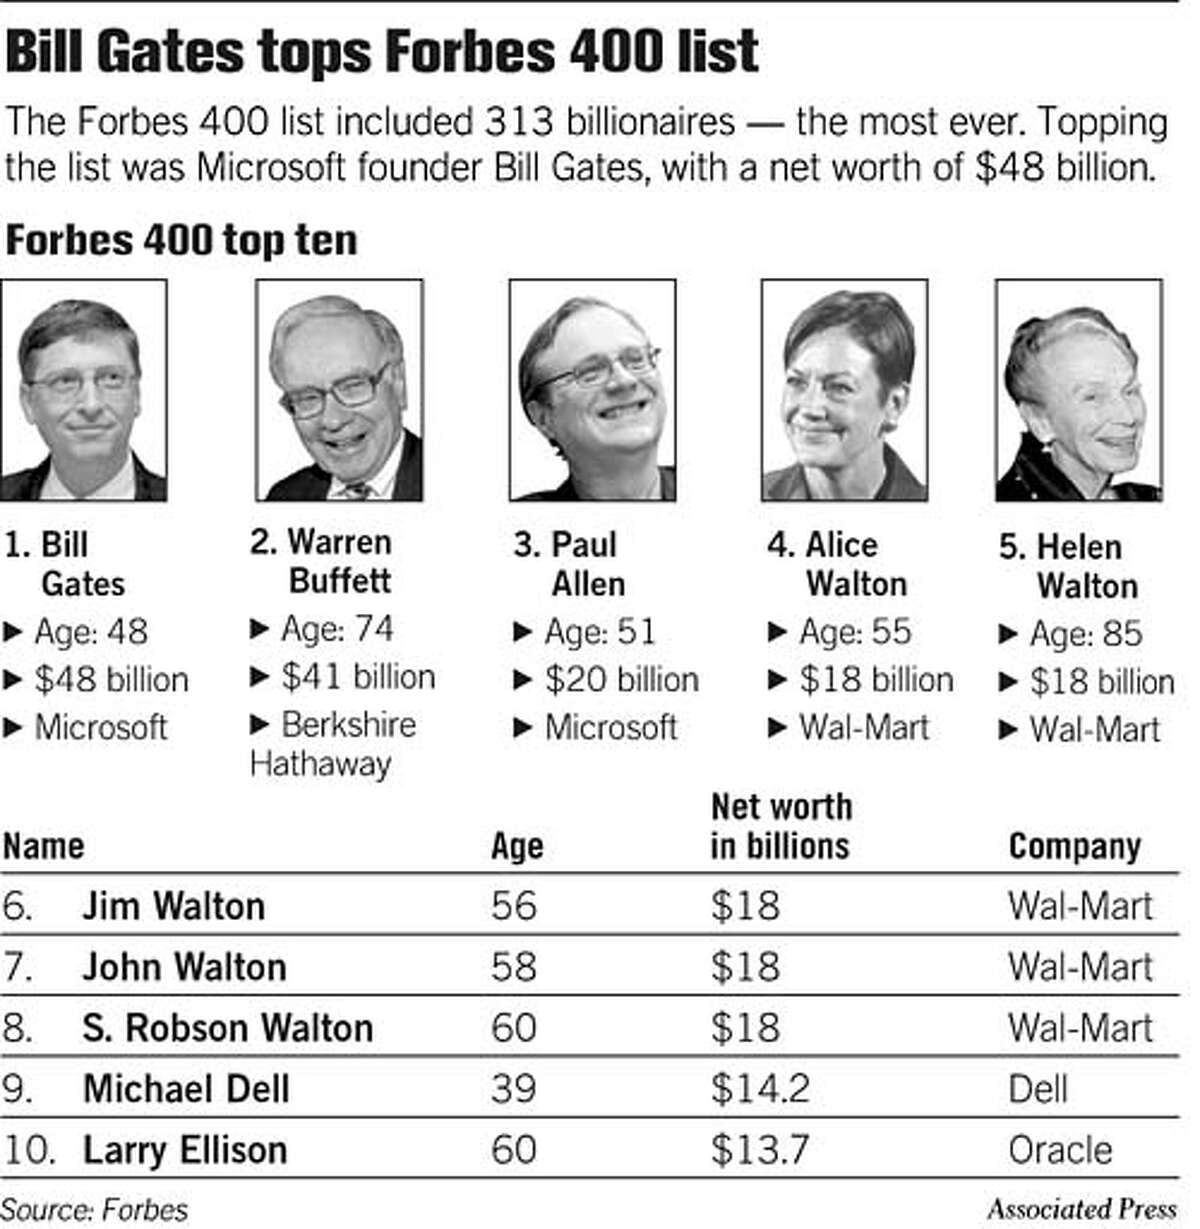 Forbes lists 400 Americans with most billions, millions / 44 Bay Area